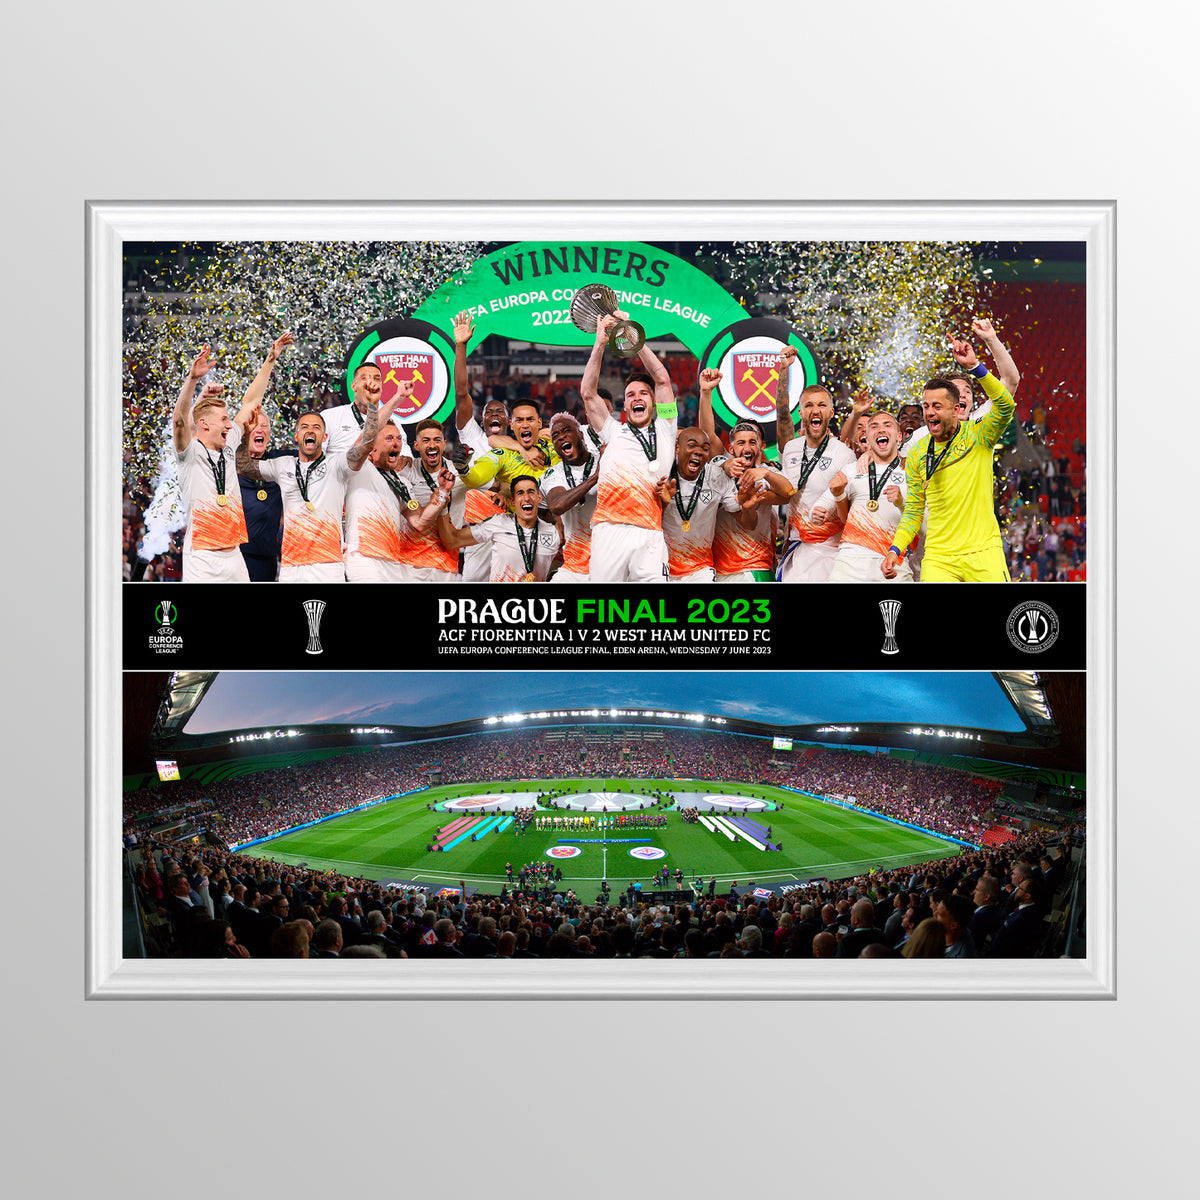 2023 UEFA Europa Conference League Final Prague Celebration Montage Featuring Trophy Lift and Panoramic Line Up